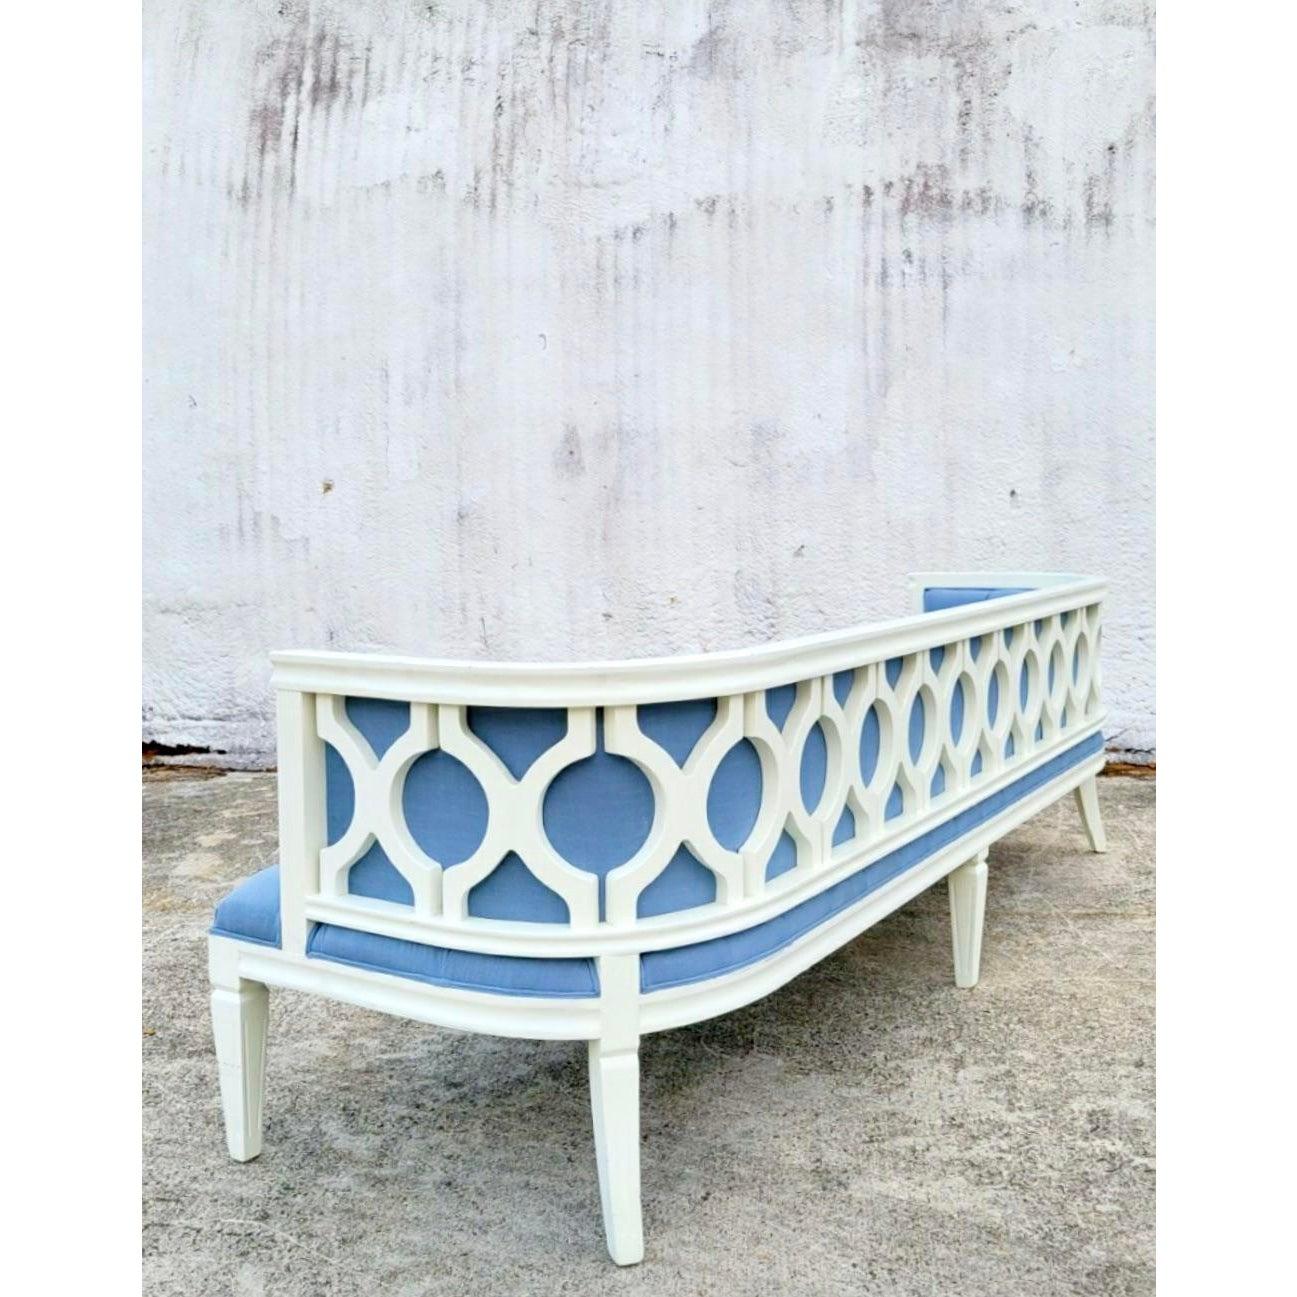 Spectacular custom vintage long tufted sofa. Gorgeous lacquered frame in a classic white with a bright blue tufted upholstery. A dramatic addition to any décor. Extra long for extra glamour. Beautiful from all sides. Can sit easily in the center of